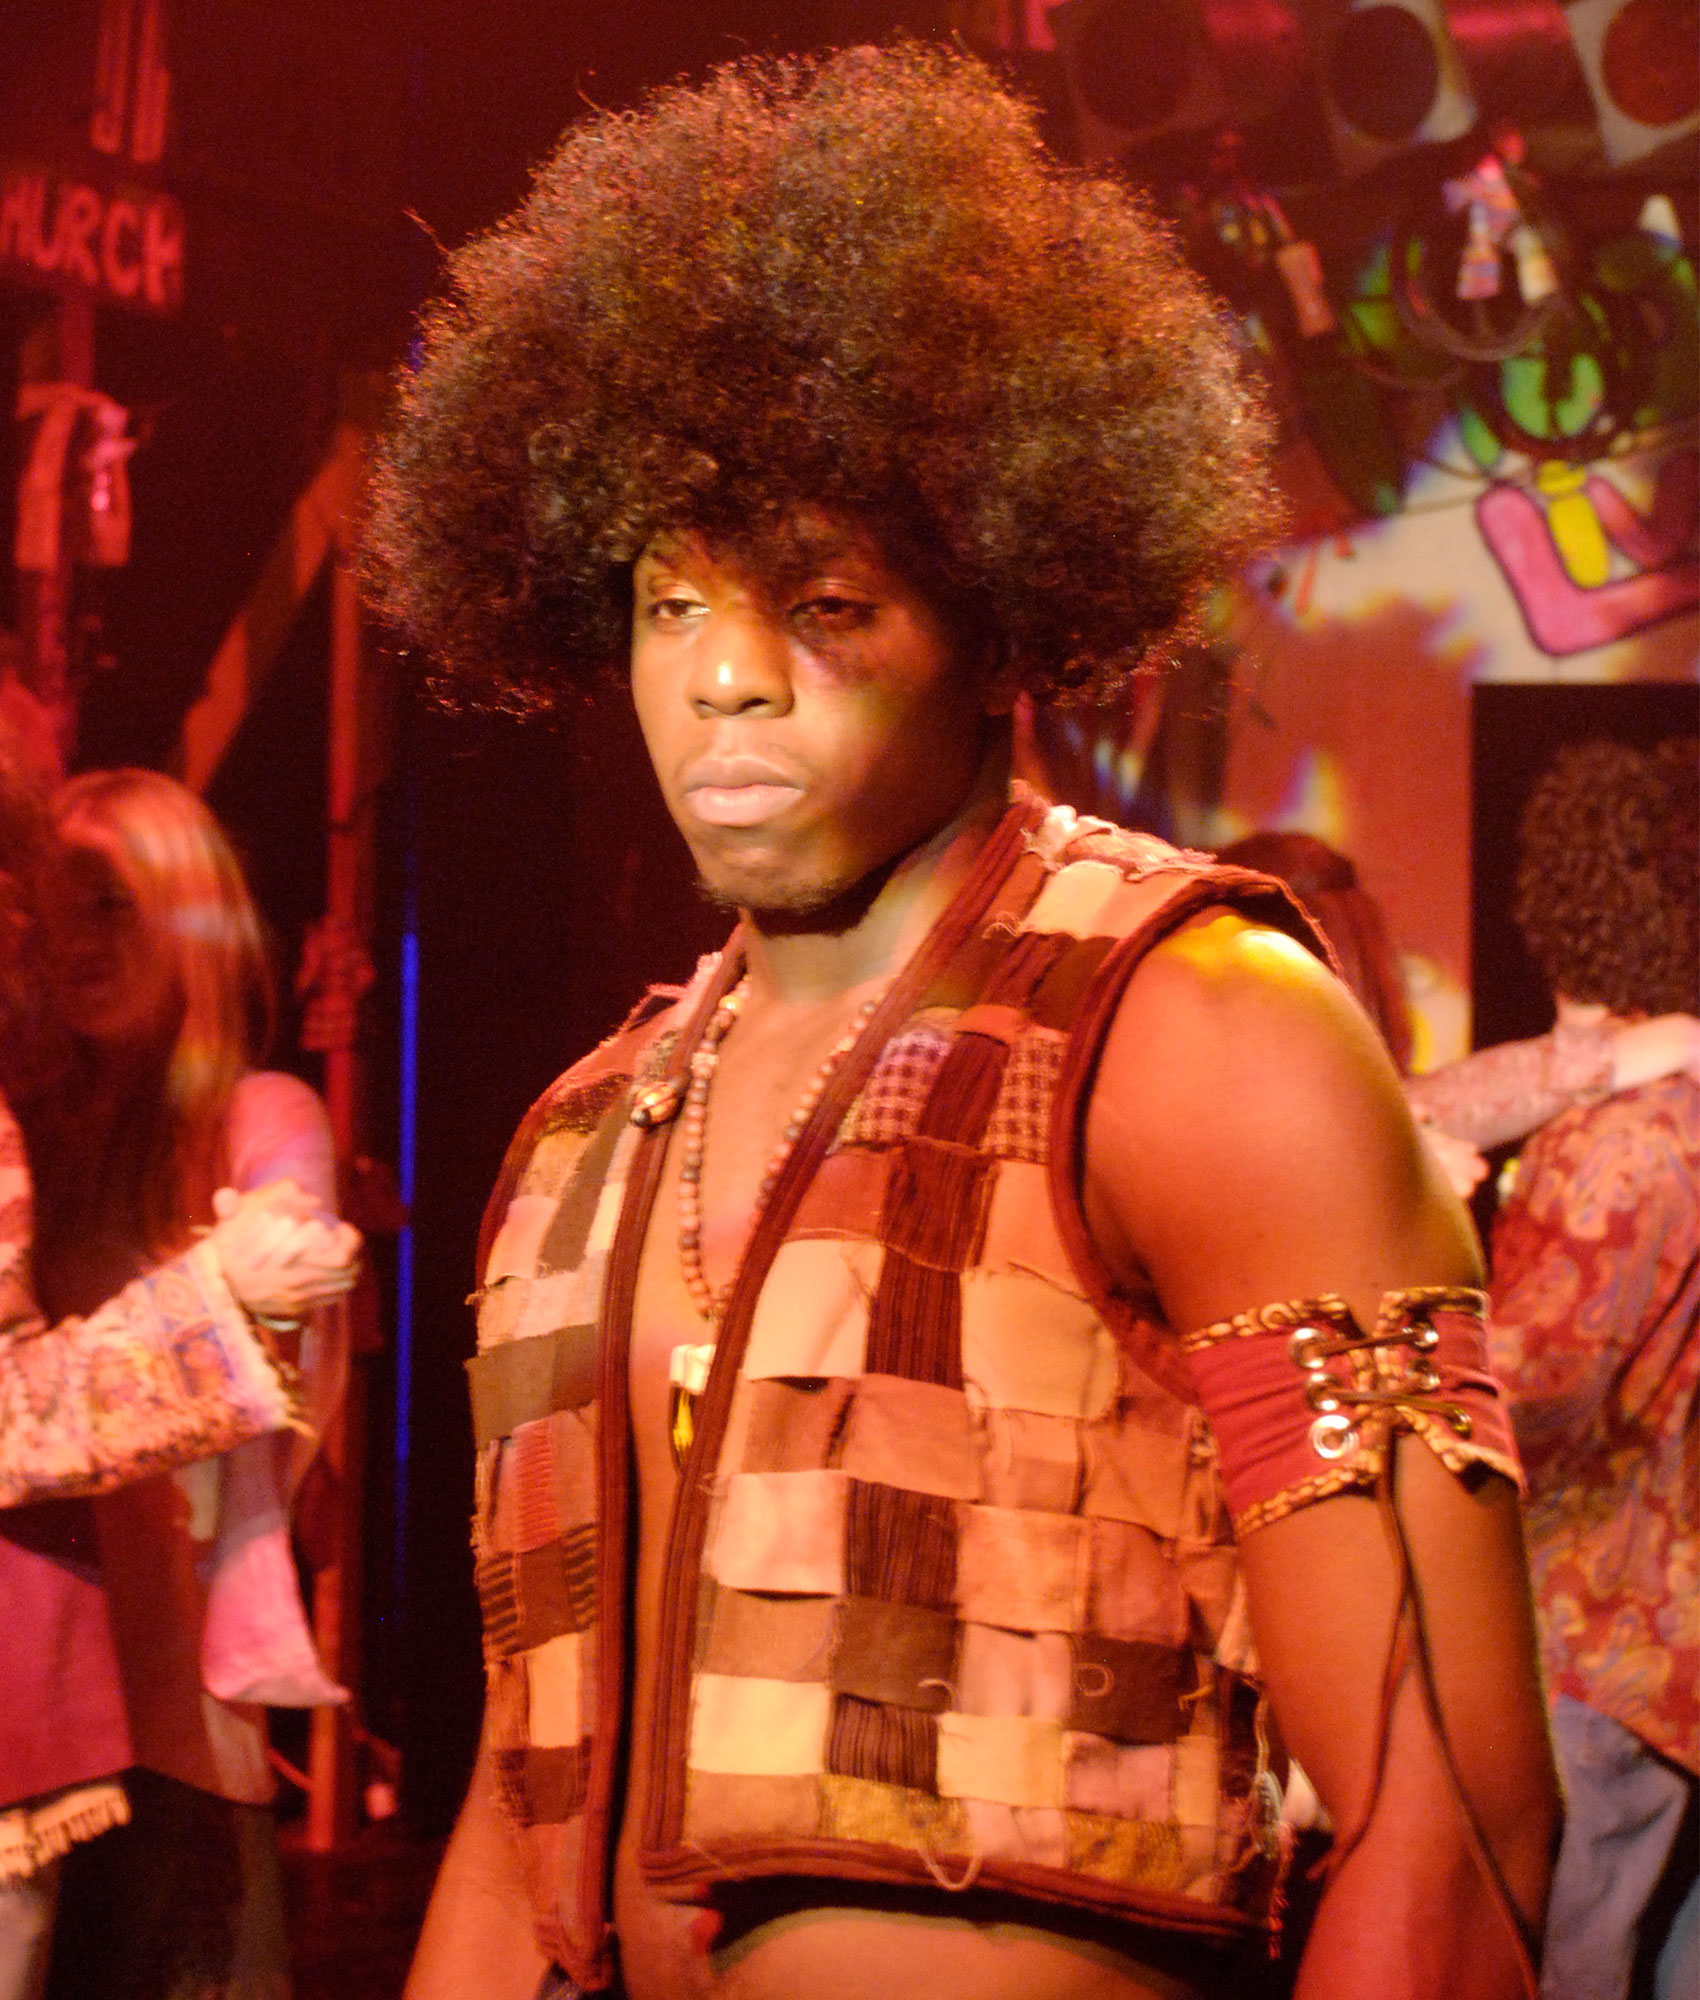 A close-up of a man with a solemn expression and an afro wearing a patchwork vest and a laced-up band around one of his triceps.